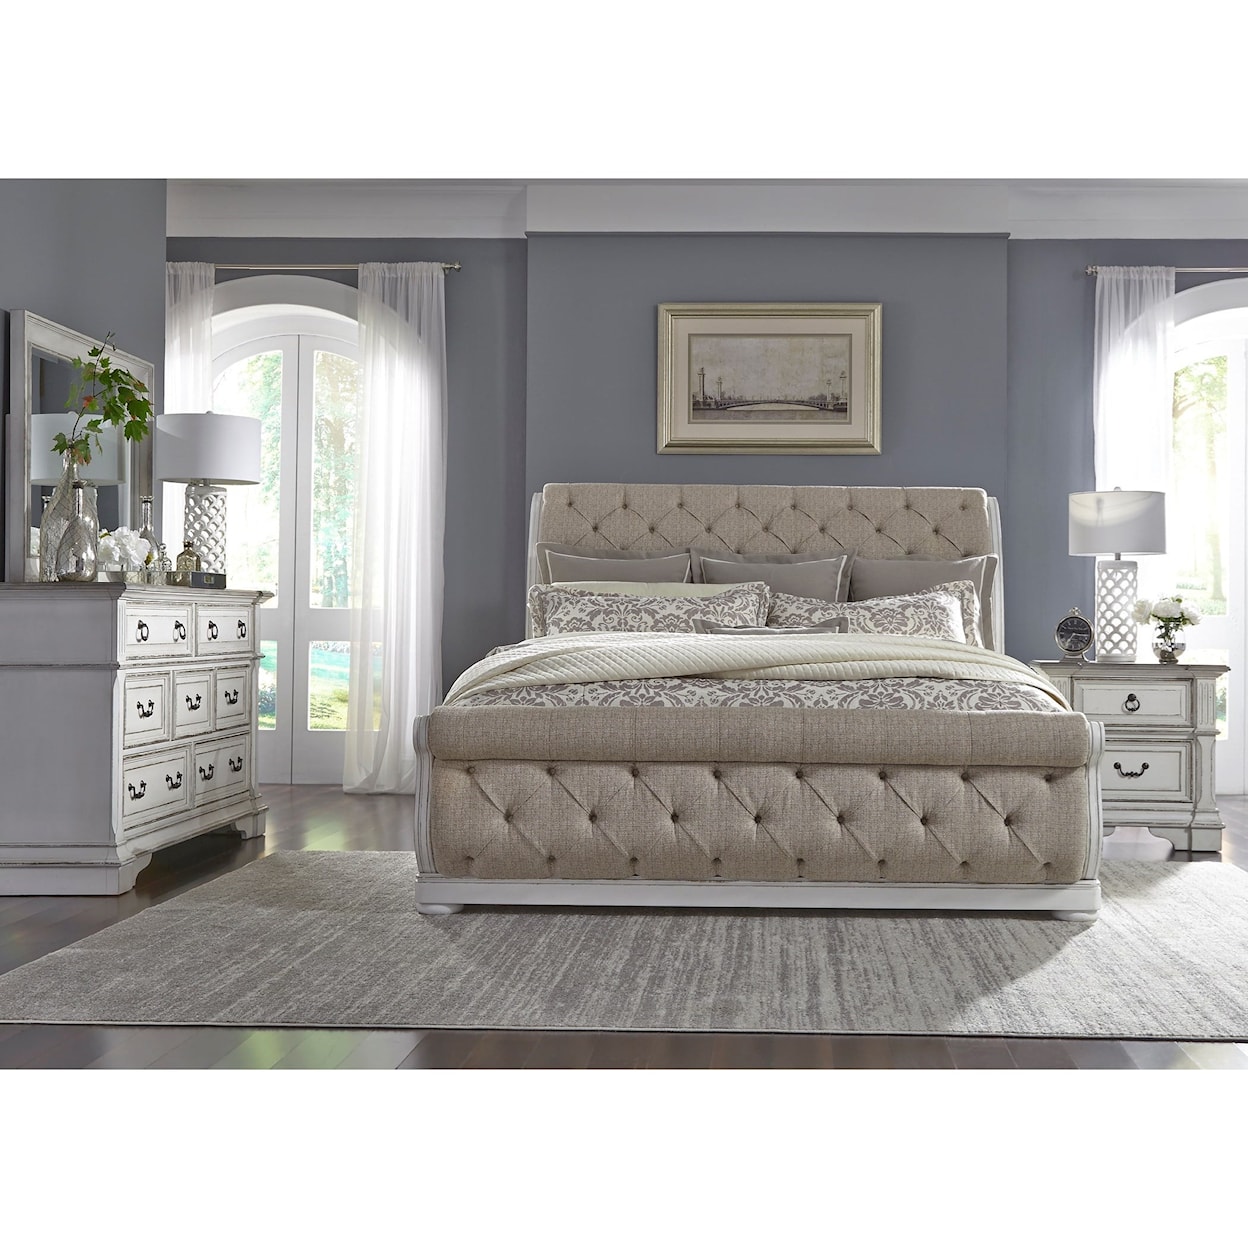 Libby Abbey Park 4-Piece Upholstered King Sleigh Bedroom Set